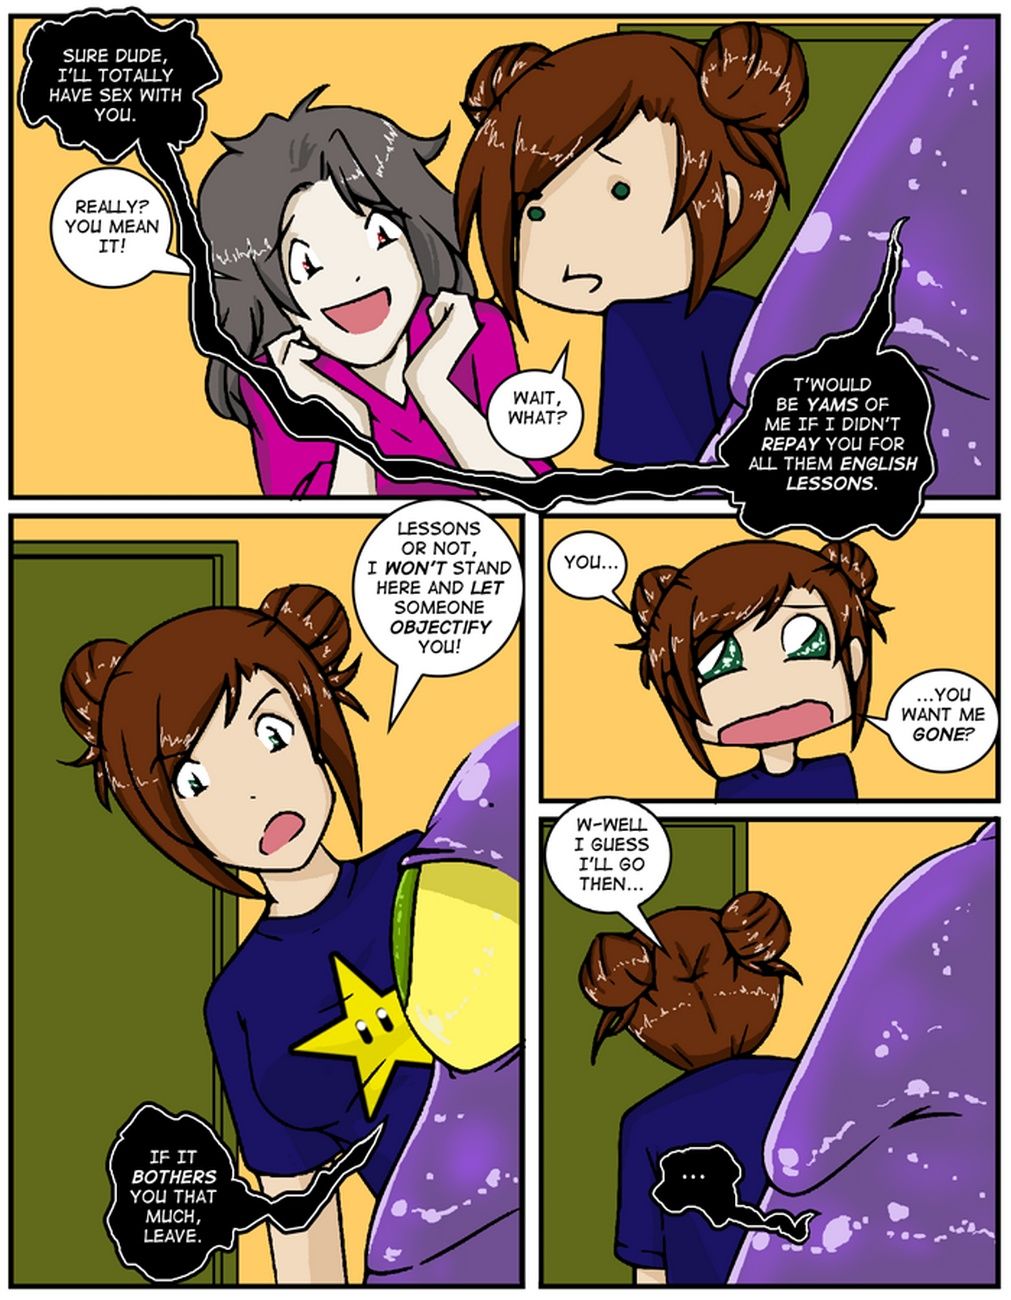 A Date With A Tentacle Monster 3 - Tentacle Hospitality page 7